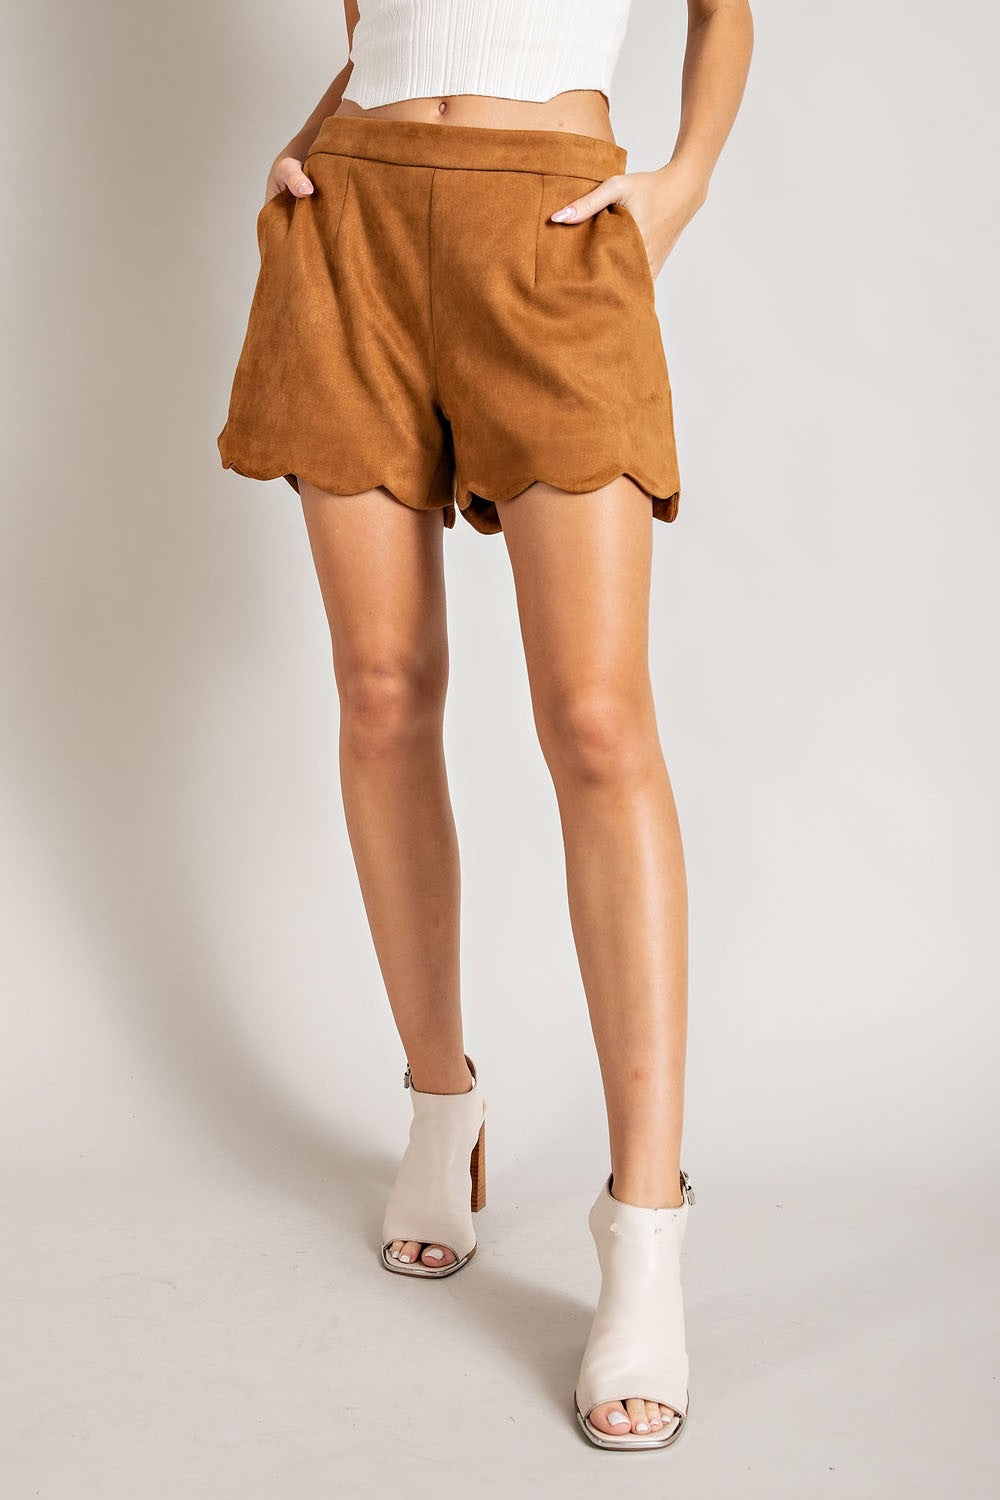 Camel brown or Olive suede fall scalloped shorts